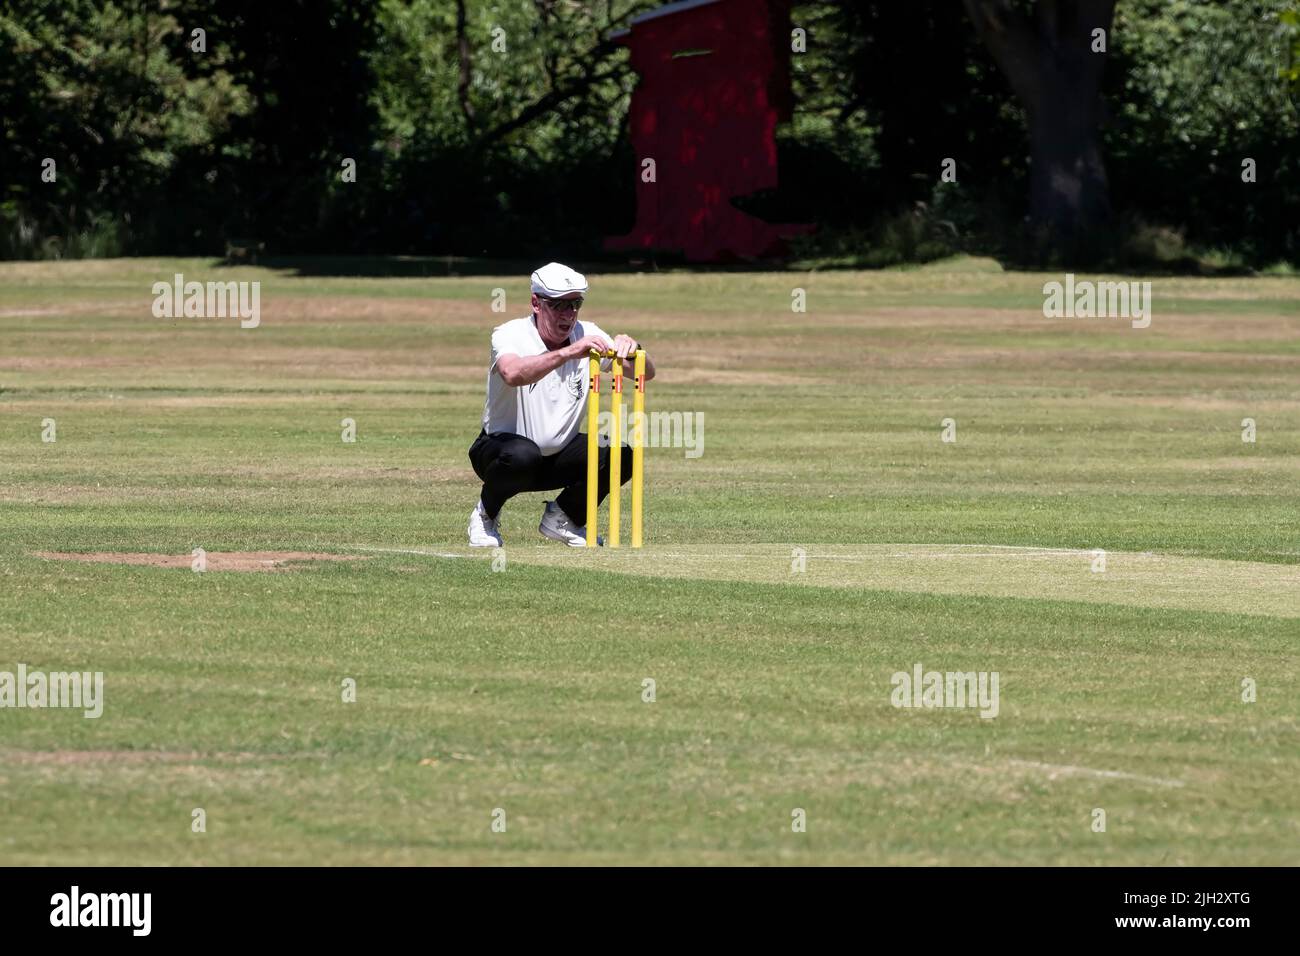 Cricket umpire placing the bails on the stumps and checking the wicket prior to the game commencing during summer in Yorkshire, U.K. Stock Photo